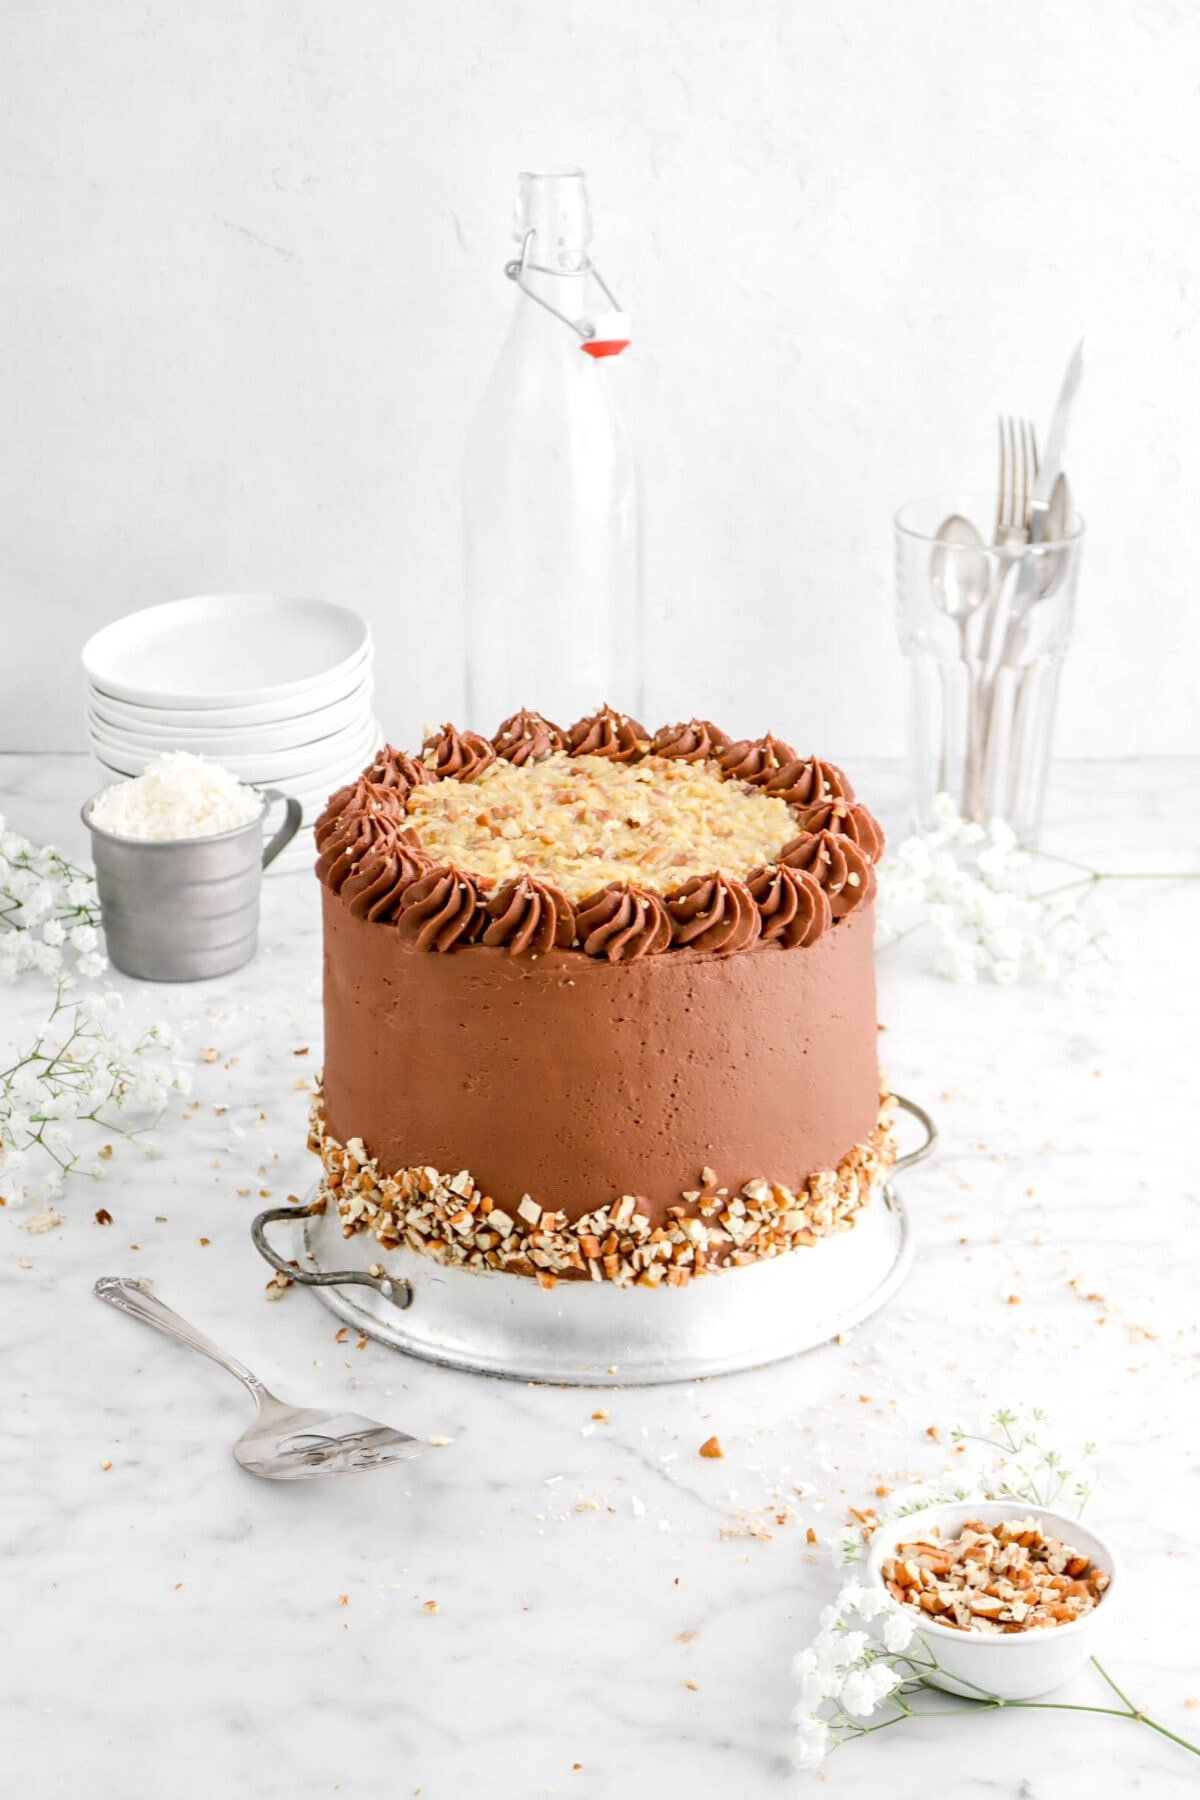 angled shot of german chocolate cake on upside down pie plate with cake knife, flowers, cup measure of coconut flakes, stack of plates, and glass full of silver utensils behind